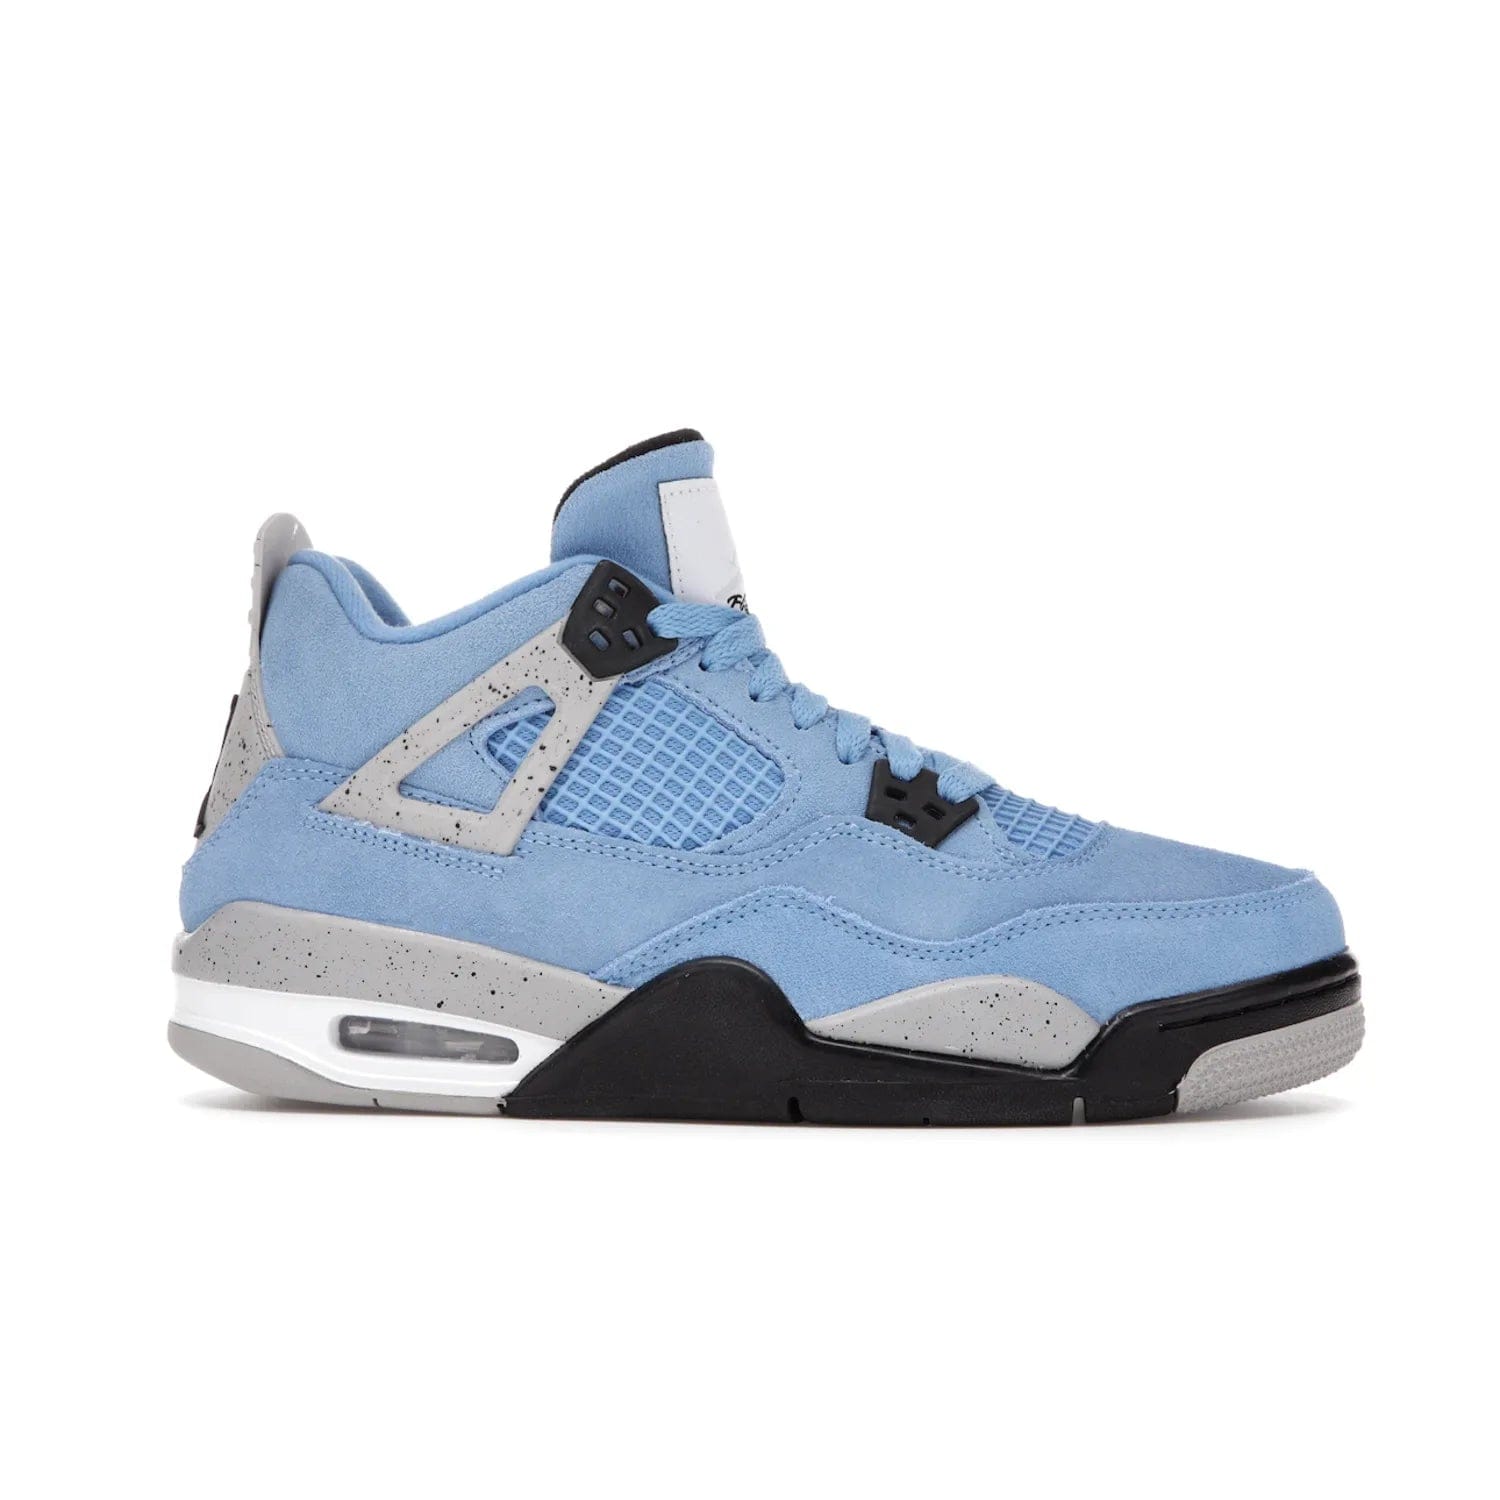 Jordan 4 Retro University Blue (GS) - Image 2 - Only at www.BallersClubKickz.com - Air Jordan 4 Retro University Blue GS: Classic silhouette and vibrant colors. Featuring a suede upper and Jumpman icon, this grade school-size shoe is perfect for collections and retails at $150.